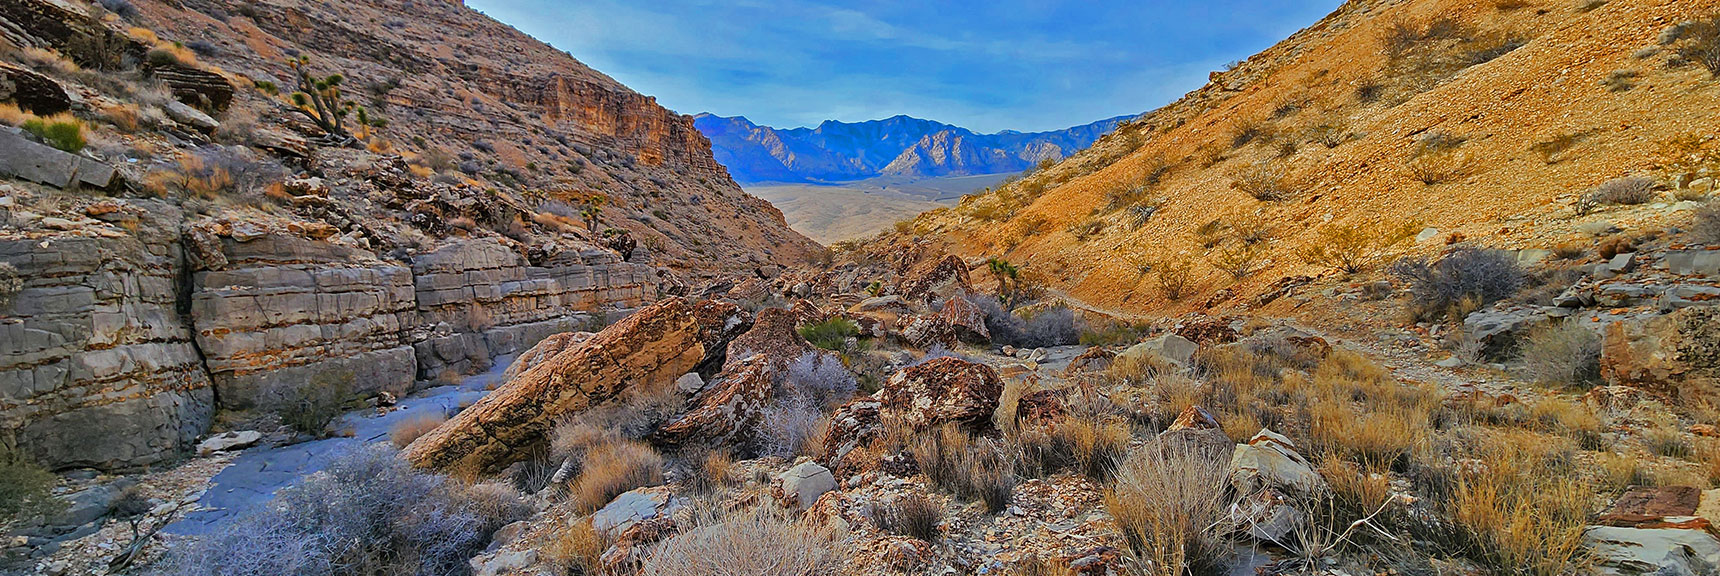 Skull Canyon Has Its Own Unique Beauty. Like Another World. | Western Outer Circuit | Blue Diamond Hill | Red Rock Canyon, Nevada